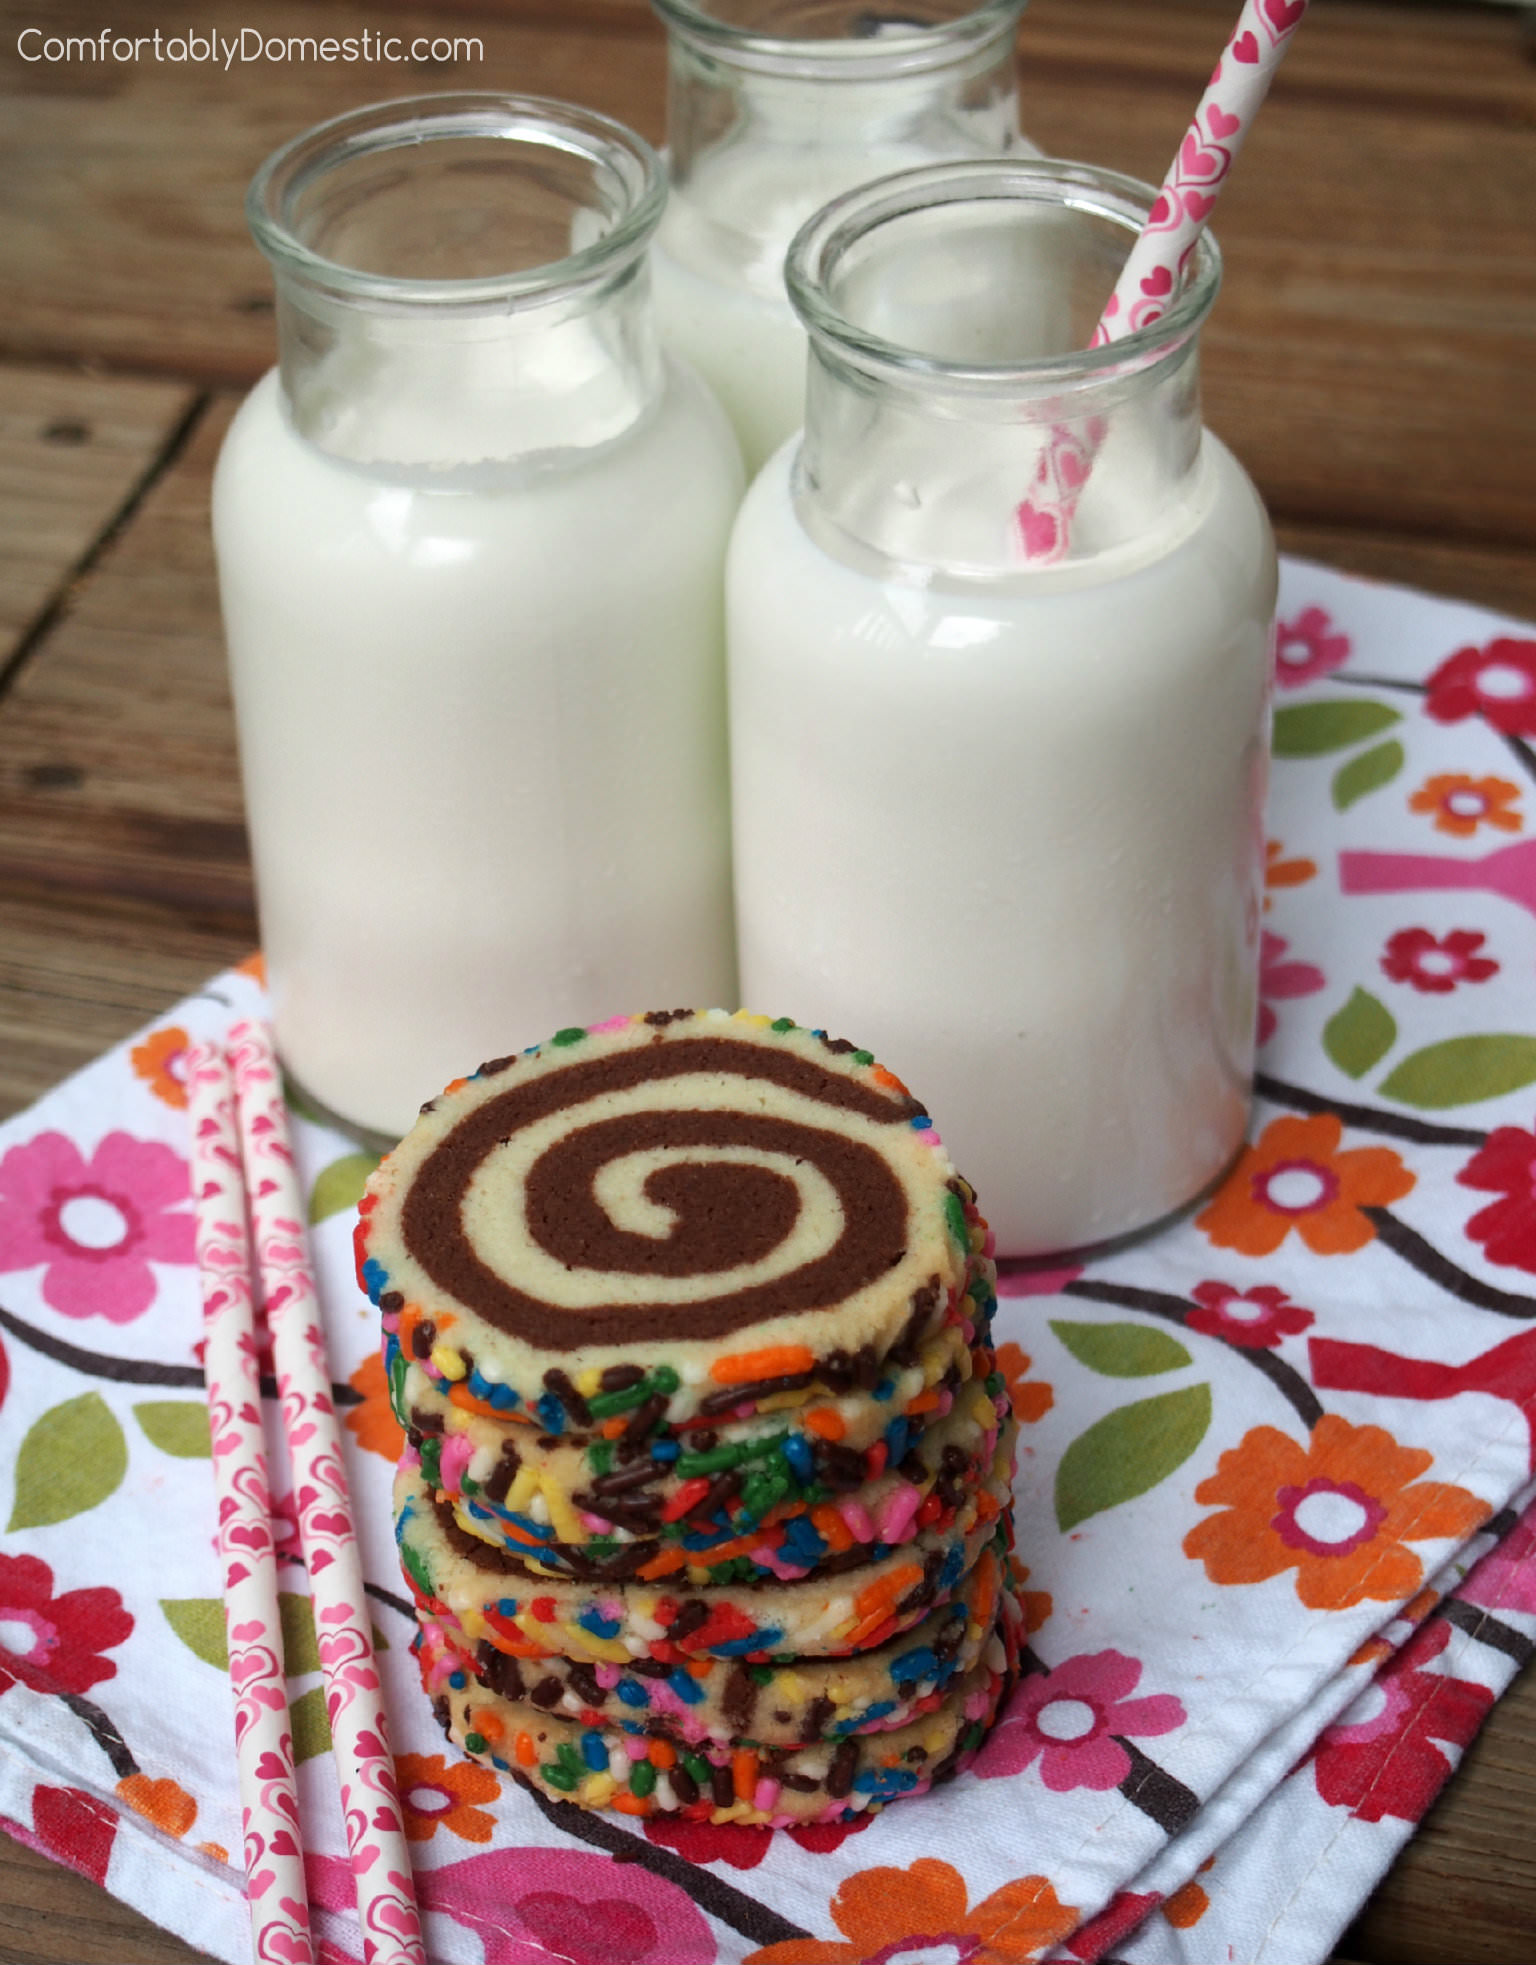 Shortbread pinwheels, also known as happiness cookies, are buttery vanilla and chocolate shortbread cookies presented in a fun pinwheel design, with colorful sprinkles for an added touch of whimsy. | ComfortablyDomestic.com